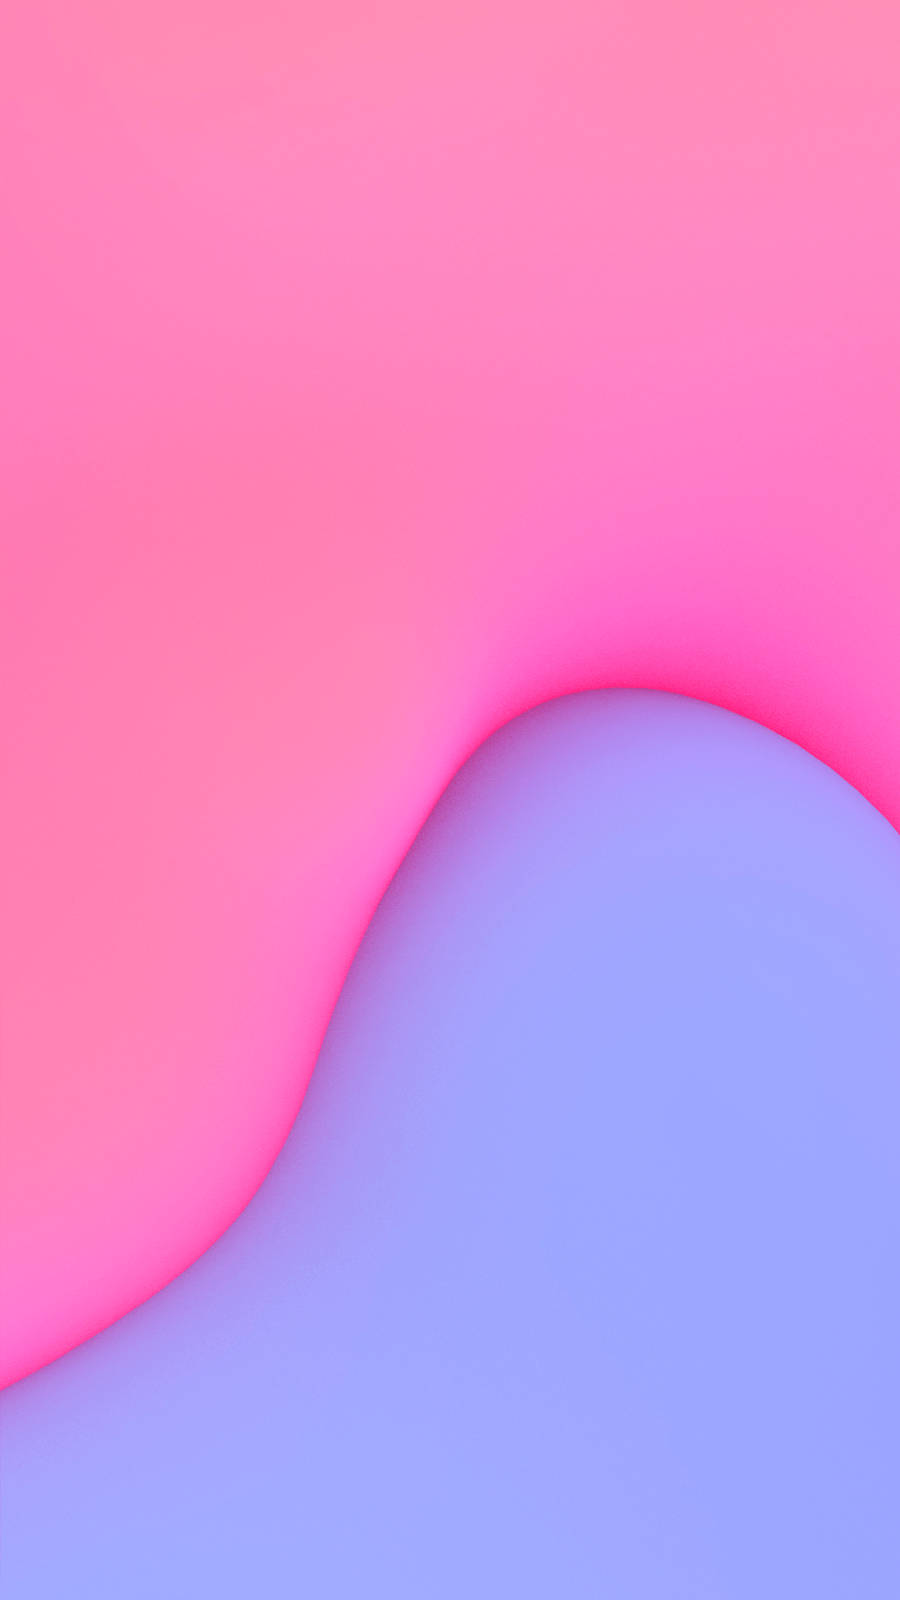 Pixel 3 Xl Pink And Purple Background